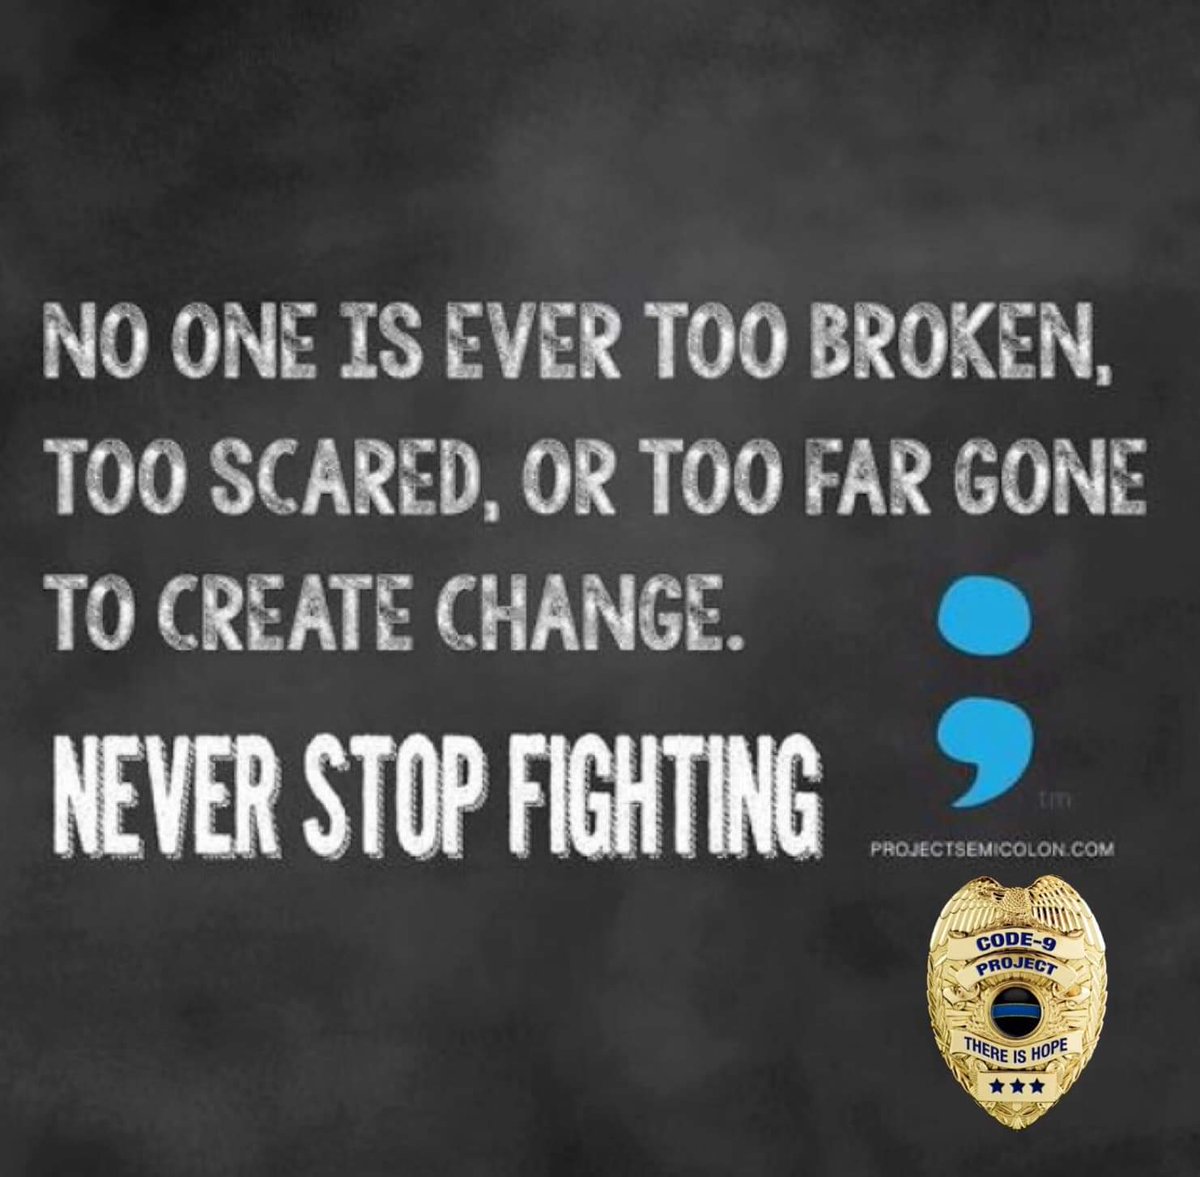 #1stresponders...  you never need suffer in silence.  We're here for you 24/7 nationwide...  #1stresponder to #1stresponders

 Safe Call Now:  24 Hour Confidential Hotline:  206-459-3020

  #ArmorUp #ArmorUpAmerica